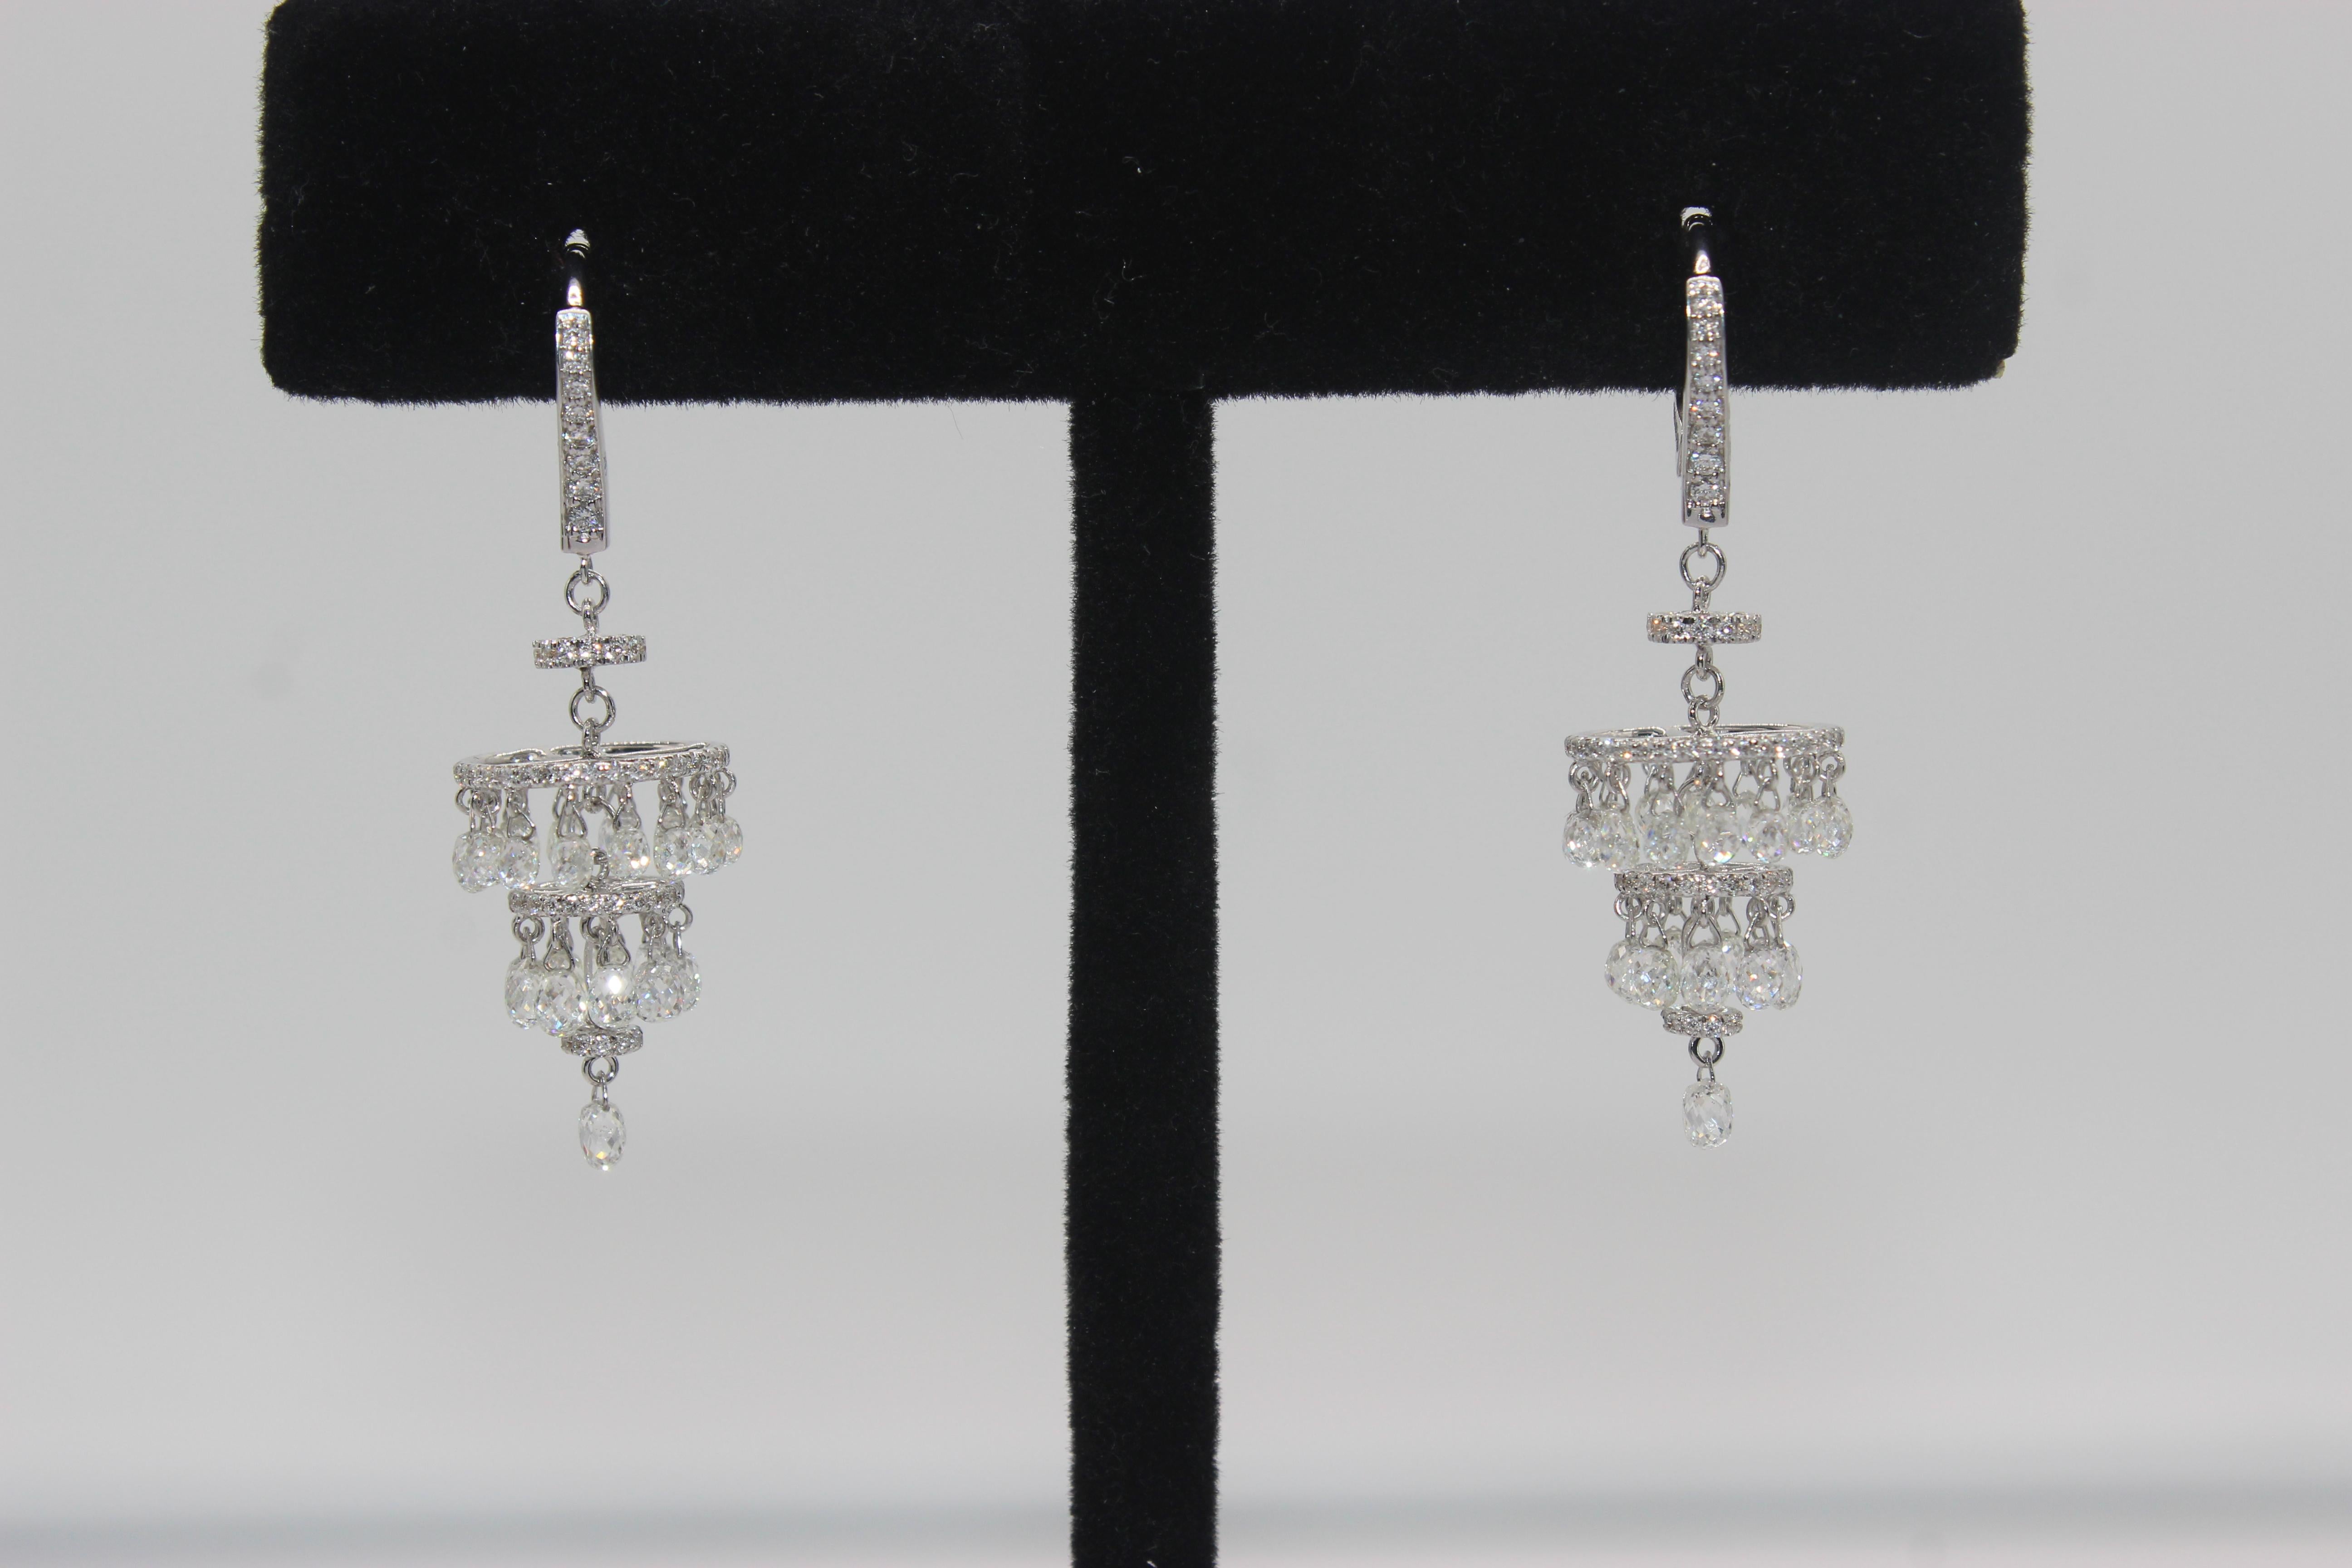 PANIM 7.05 Carat Diamond Briolette Chandelier Earrings in 18 Karat White Gold 

These earrings add elegance to any formal attire. Every pair of Panim diamond chandelier earrings is accented with stunning, hand-selected diamonds. Explore our